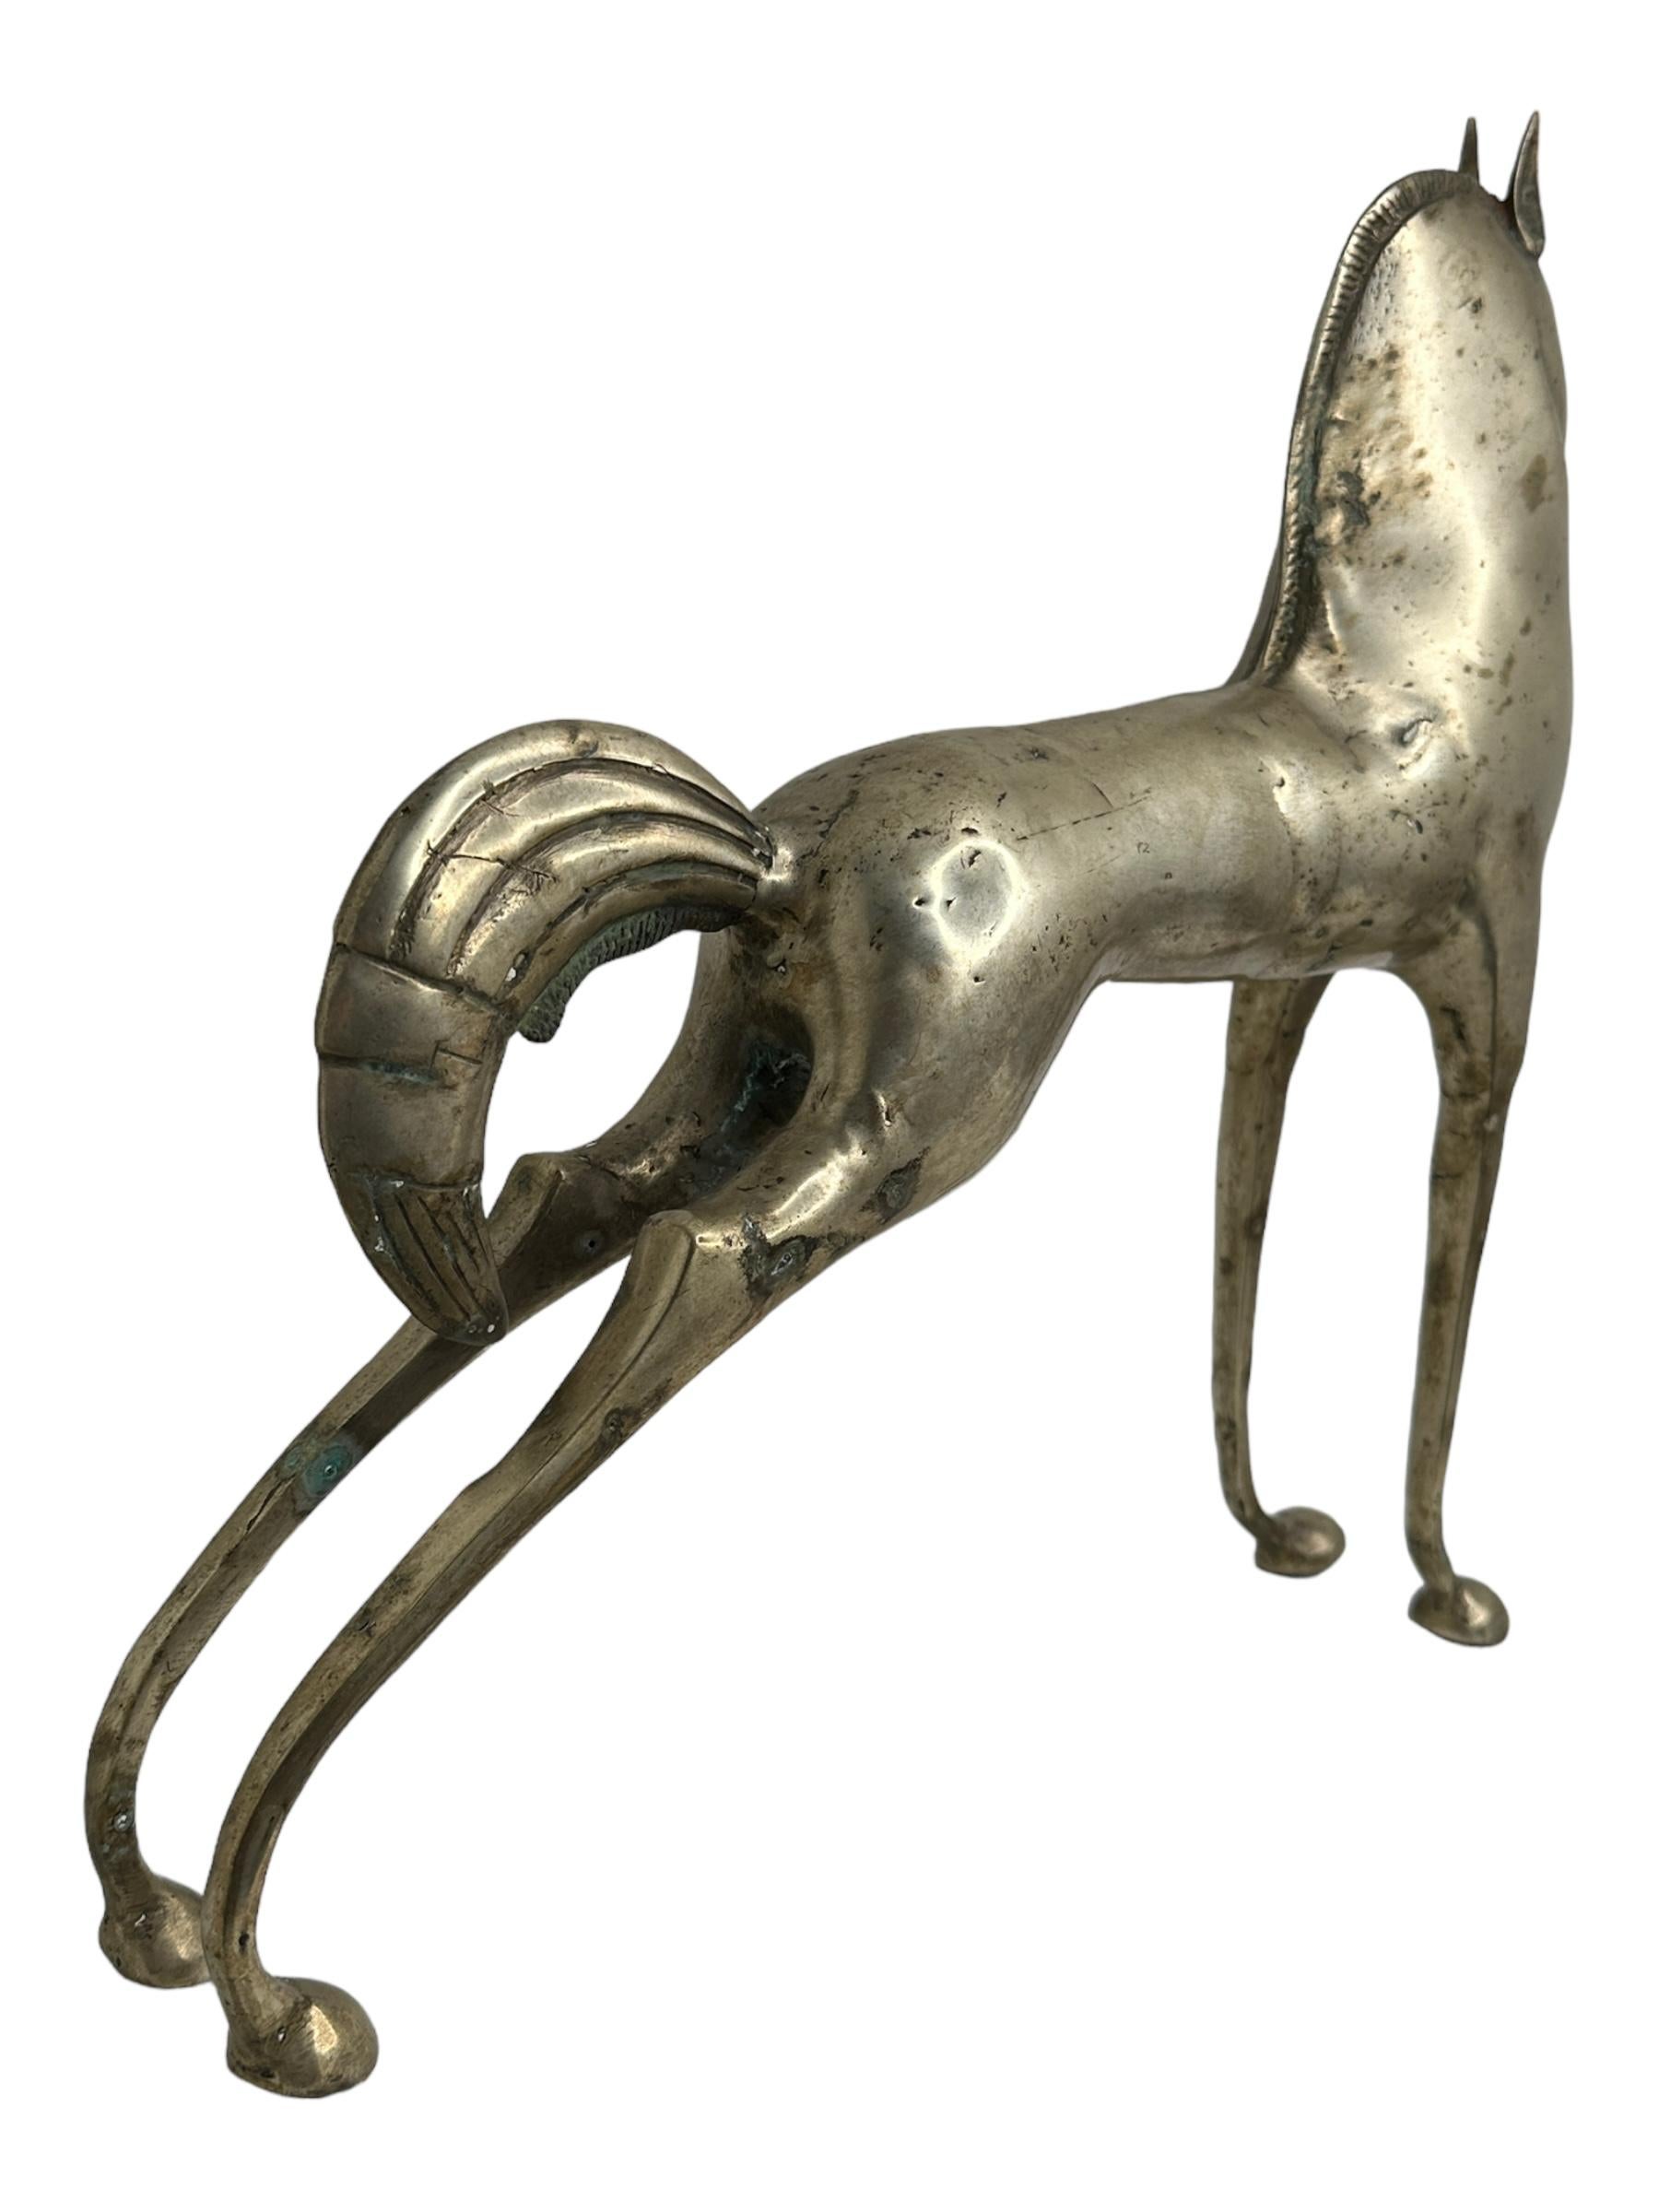 Patinated Gigantic Nickel Etruscan Horse Sculpture Weinberg Style 1970s, Italy For Sale